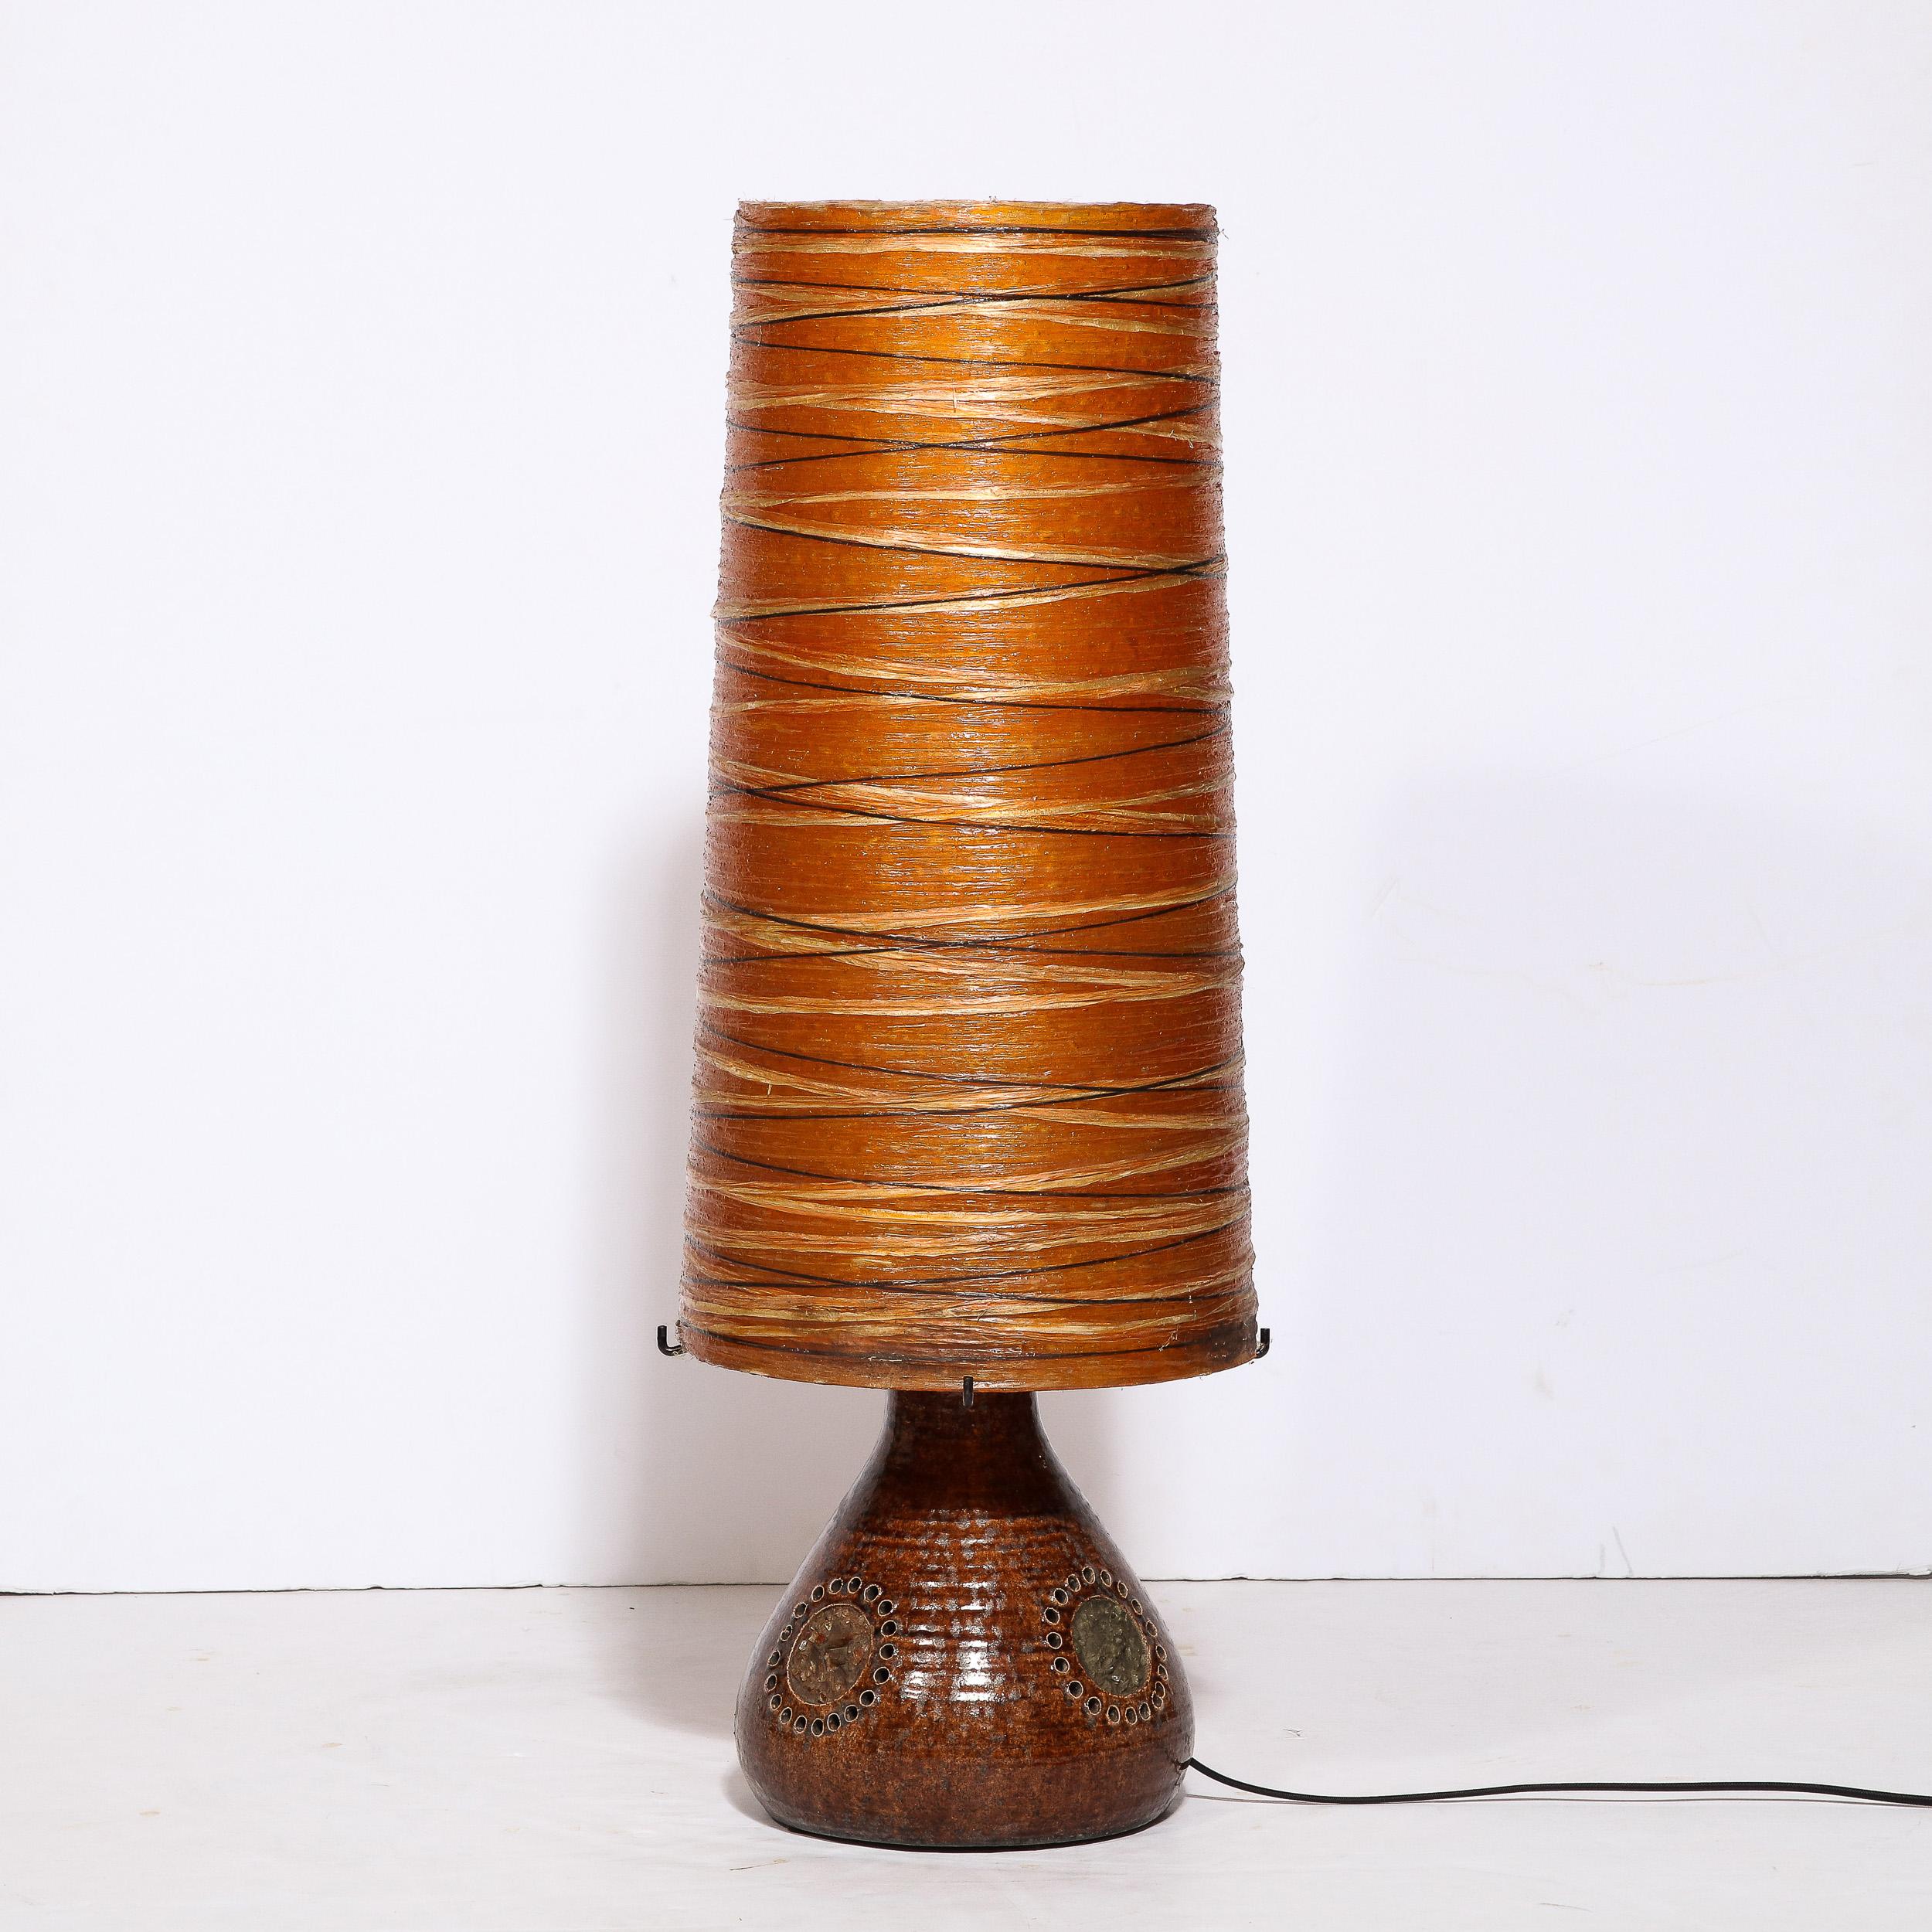 Midcentury Brutalist Ceramic Table Lamp with Horizontally Striated Resin Shade For Sale 5